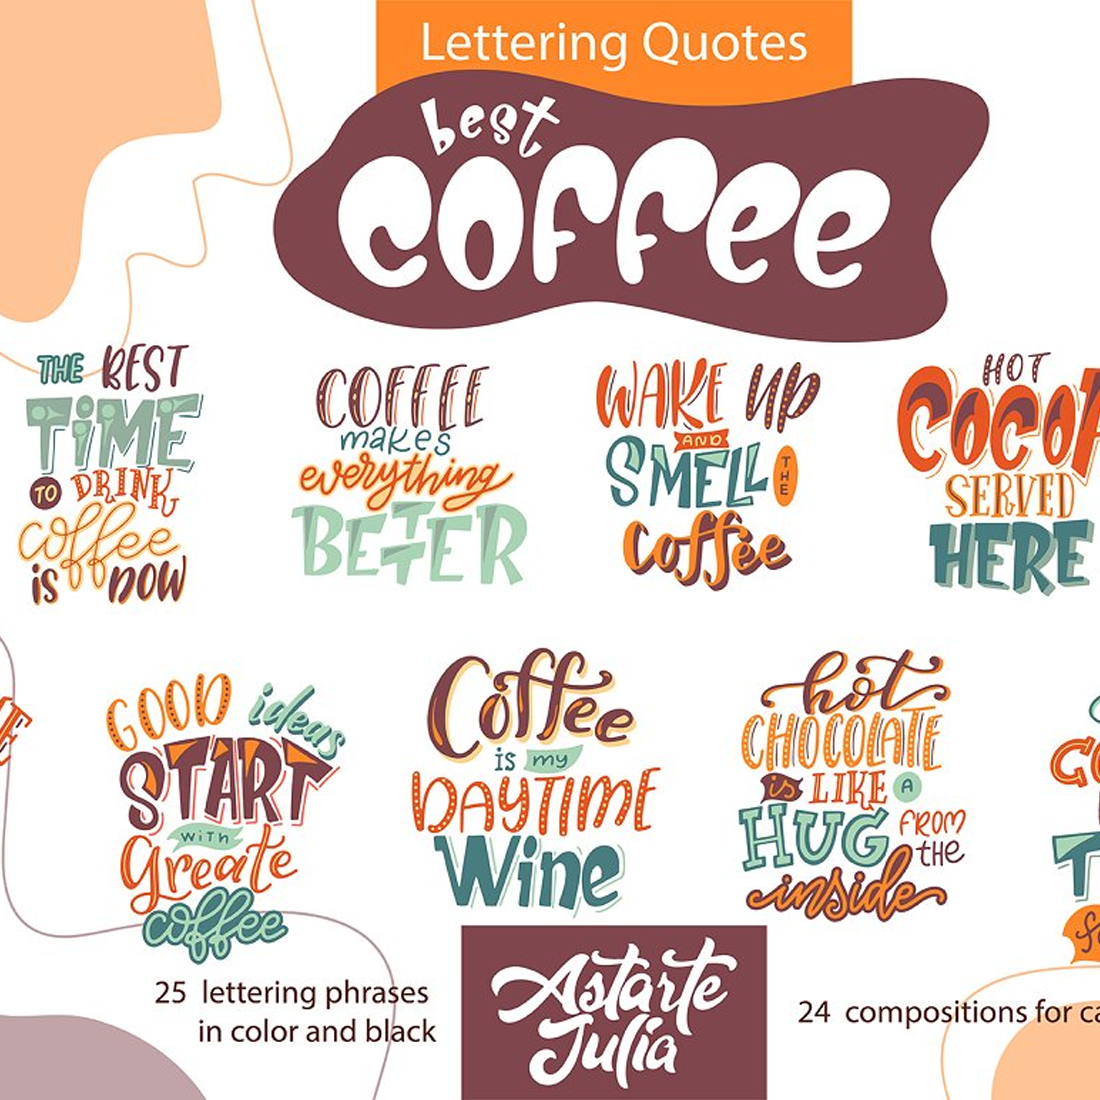 Images preview the best coffee lettering quotes.